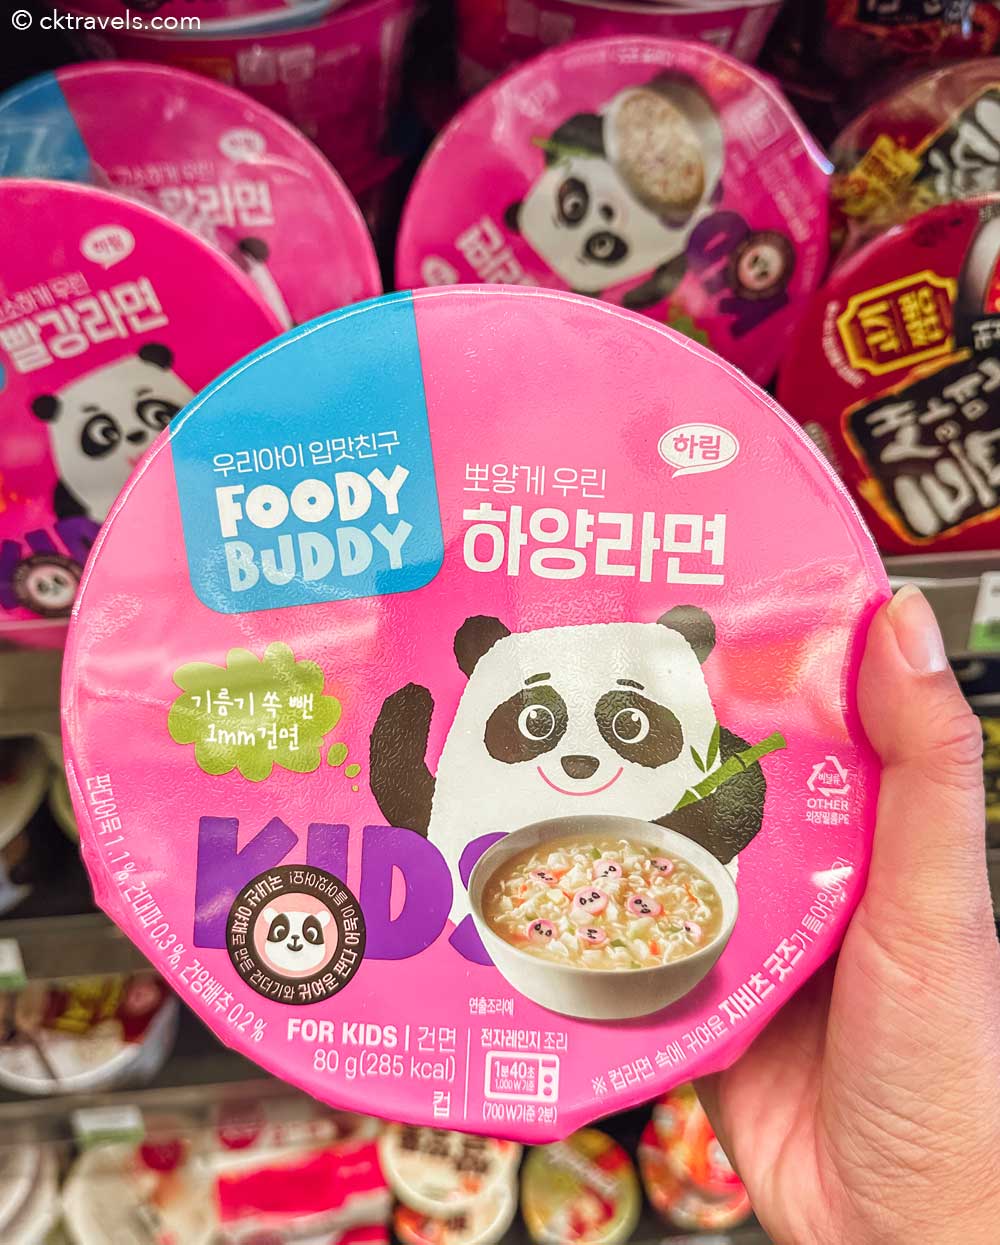 Korean Panda Fish Cake Foody Buddy Noodles  from CU convenience stores in South Korea